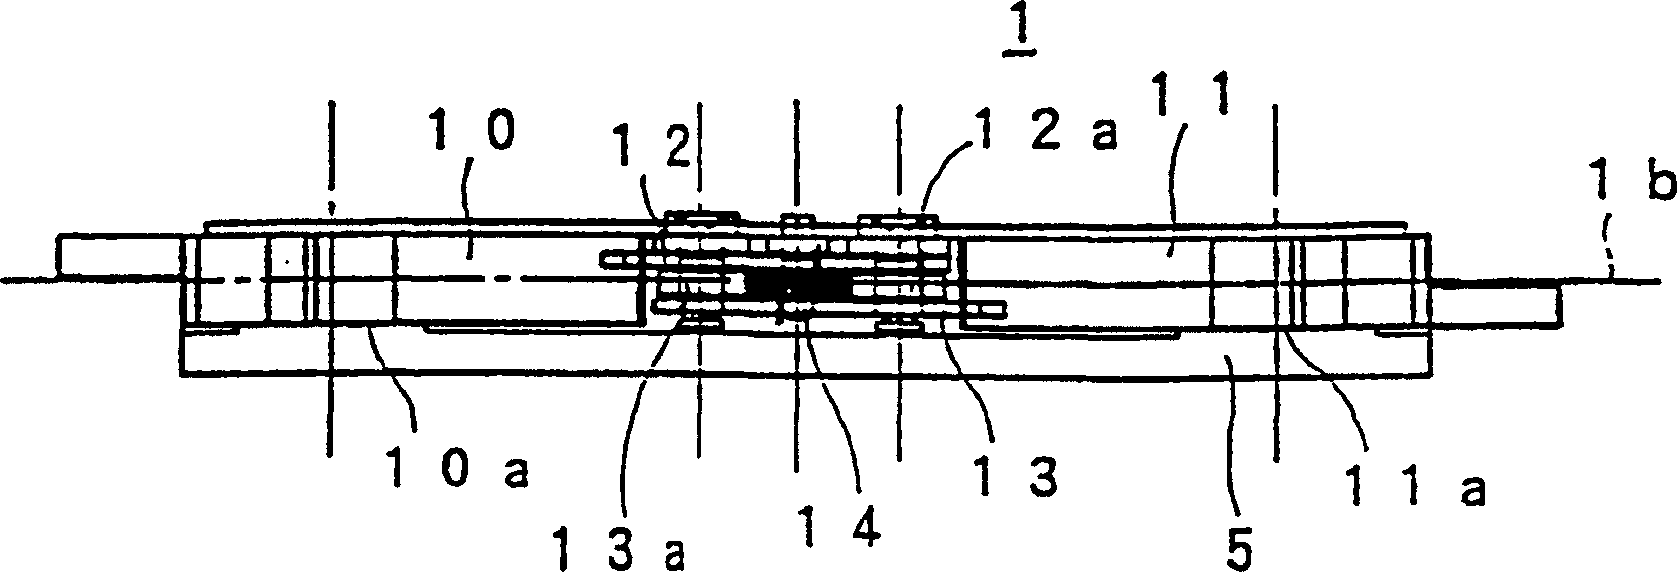 Yarn carrier of weft knitting device